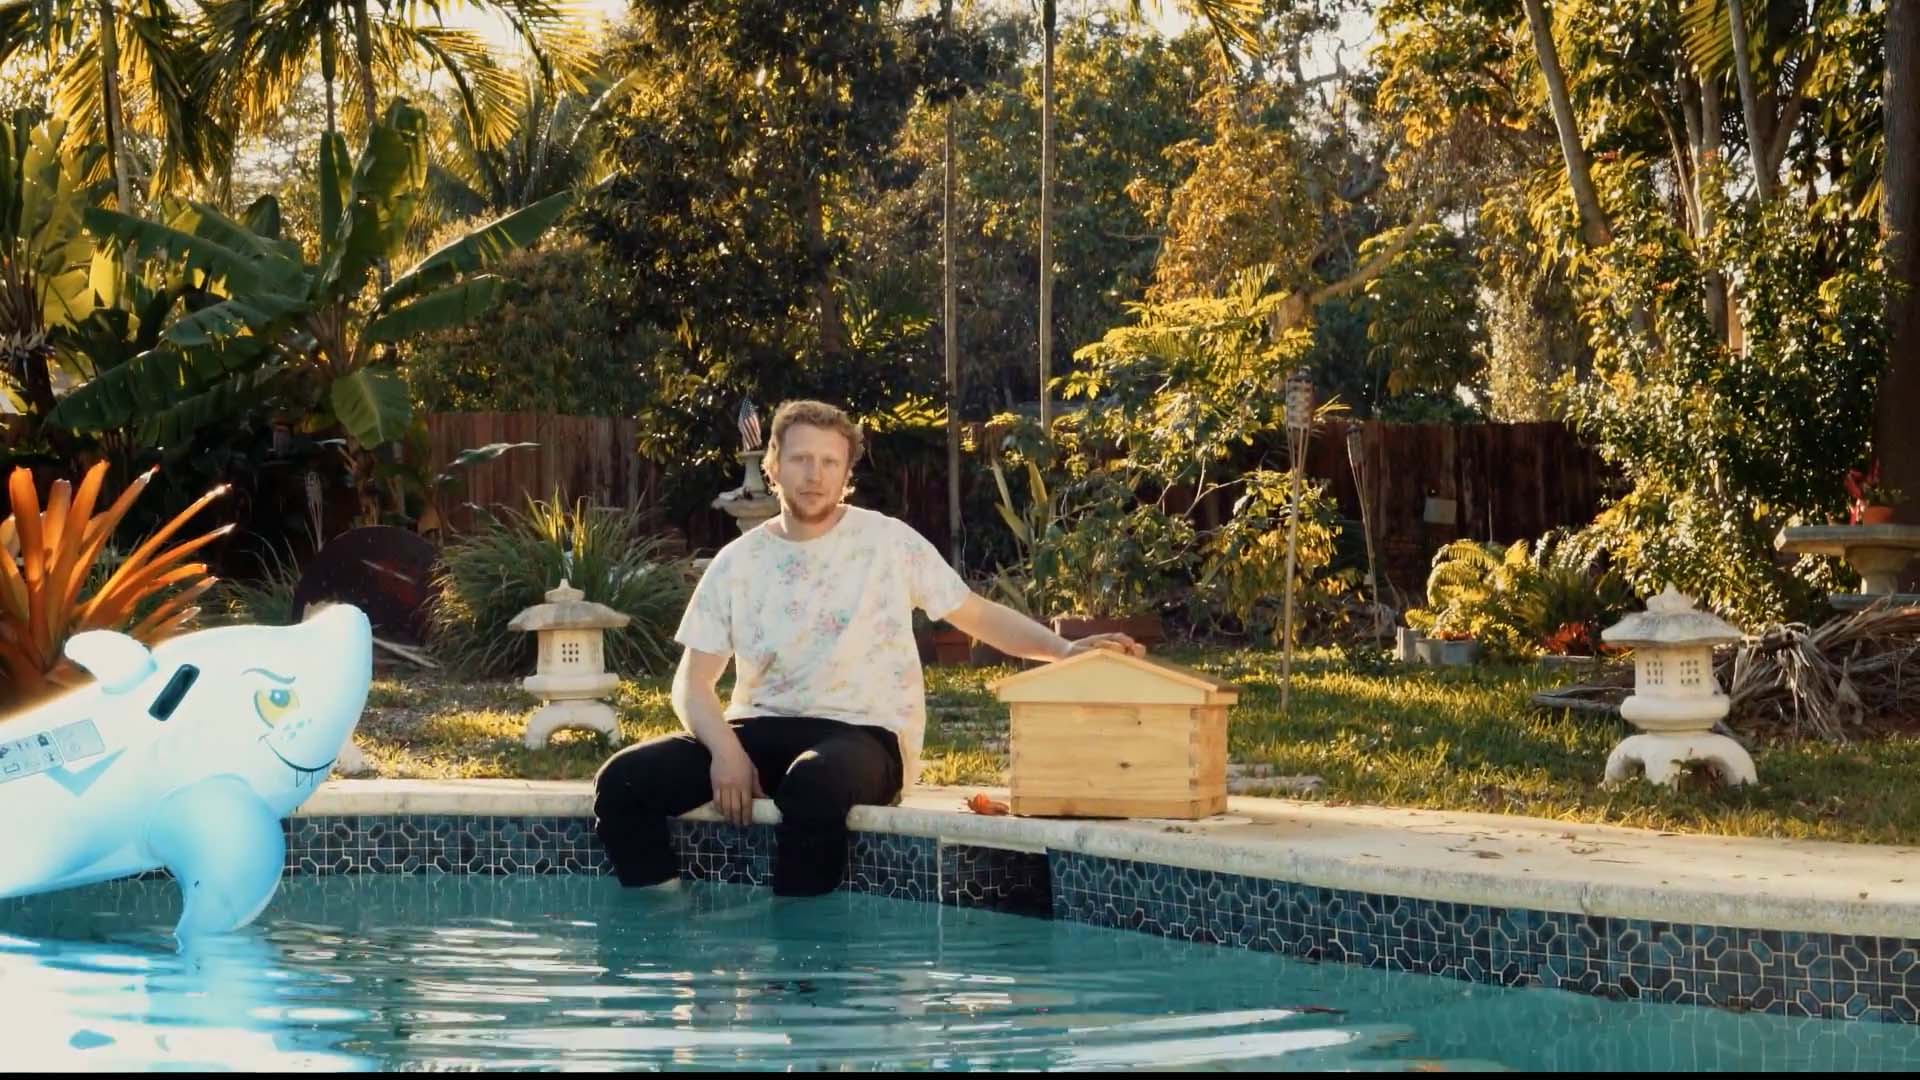 A beekeeper sits at the side of a pool with his feet in the water and one hand resting on a beehive. An inflatable shark floats beside him.